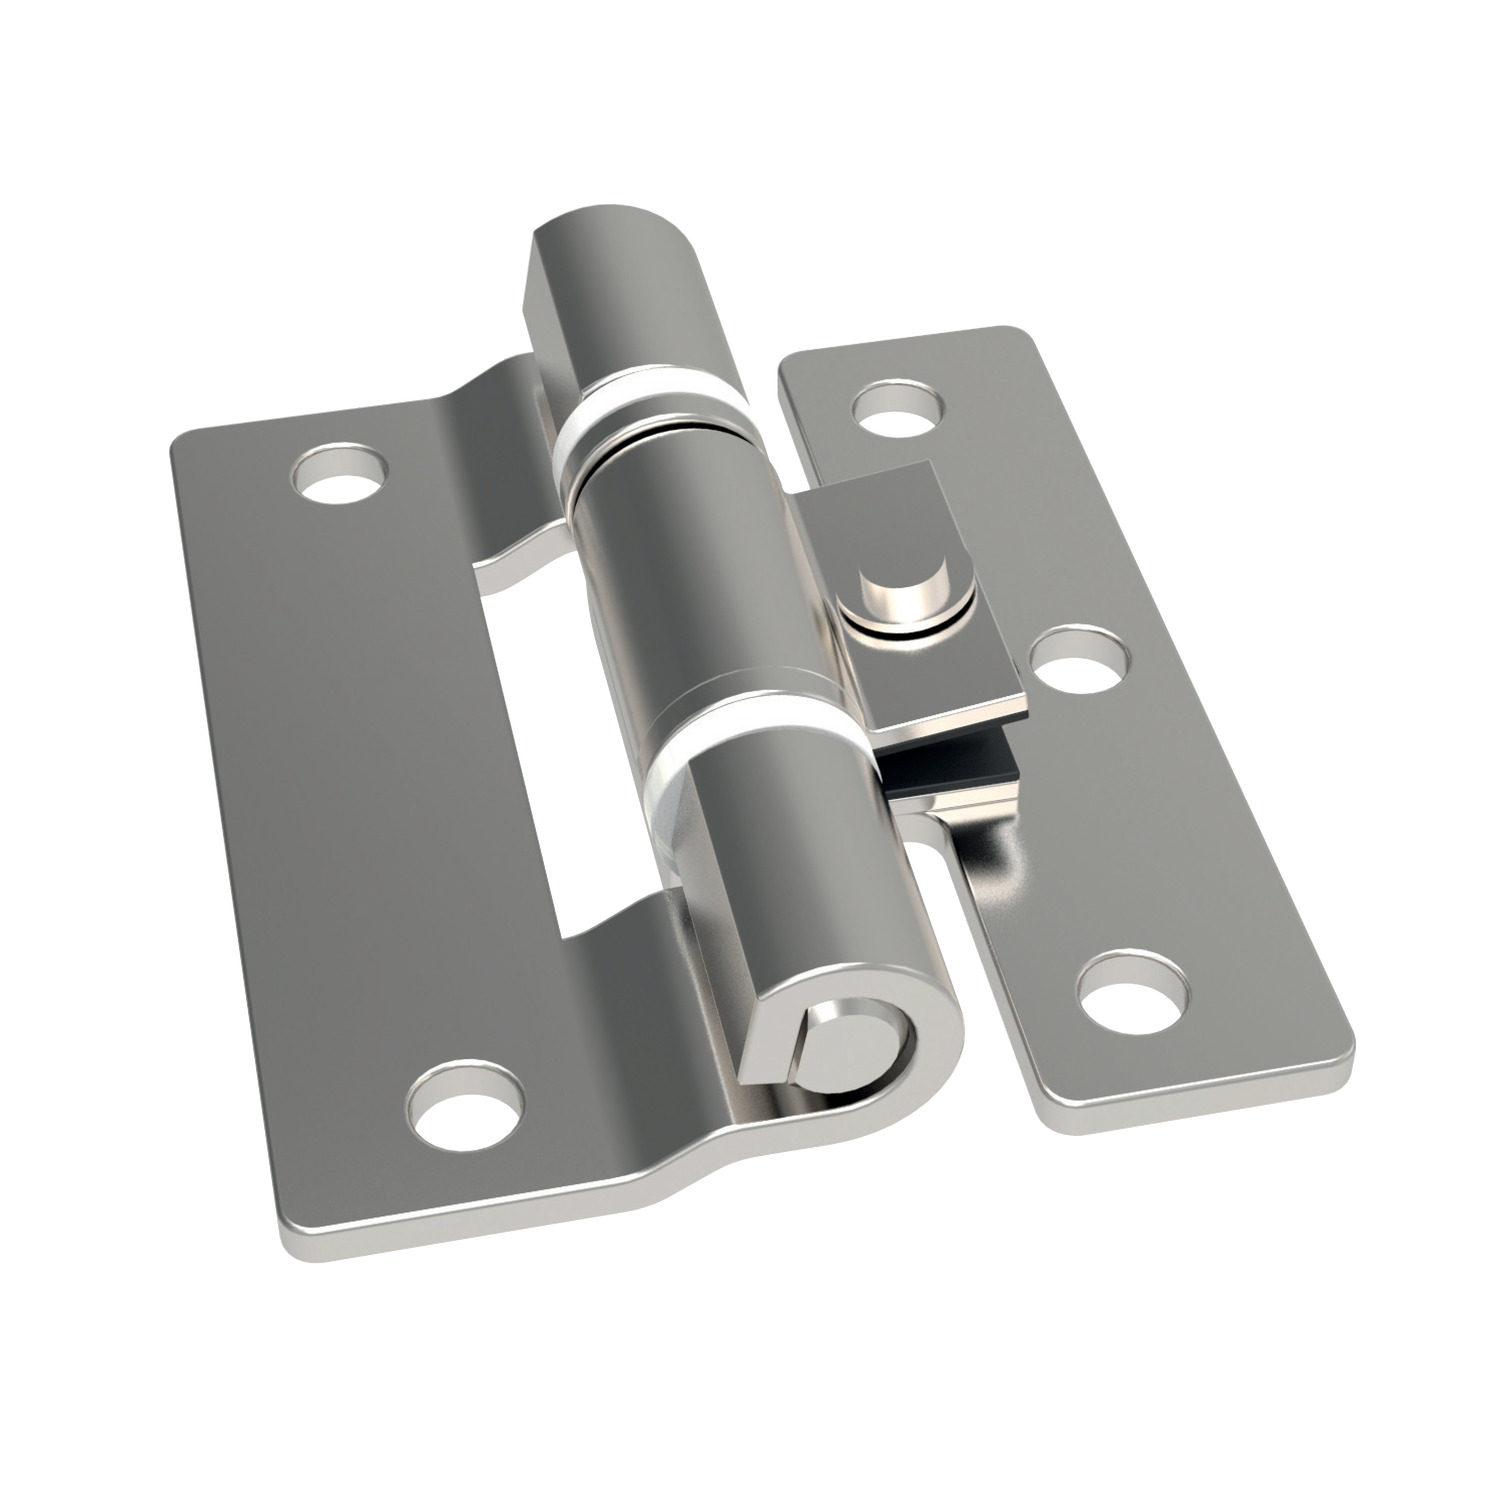 Constant Torque - Friction Hinge Constant torque friction hinges for screw mounting. Made from polish stainless steel (AISI 304 and 303), for holding a lid or door in position in corrosive environments.